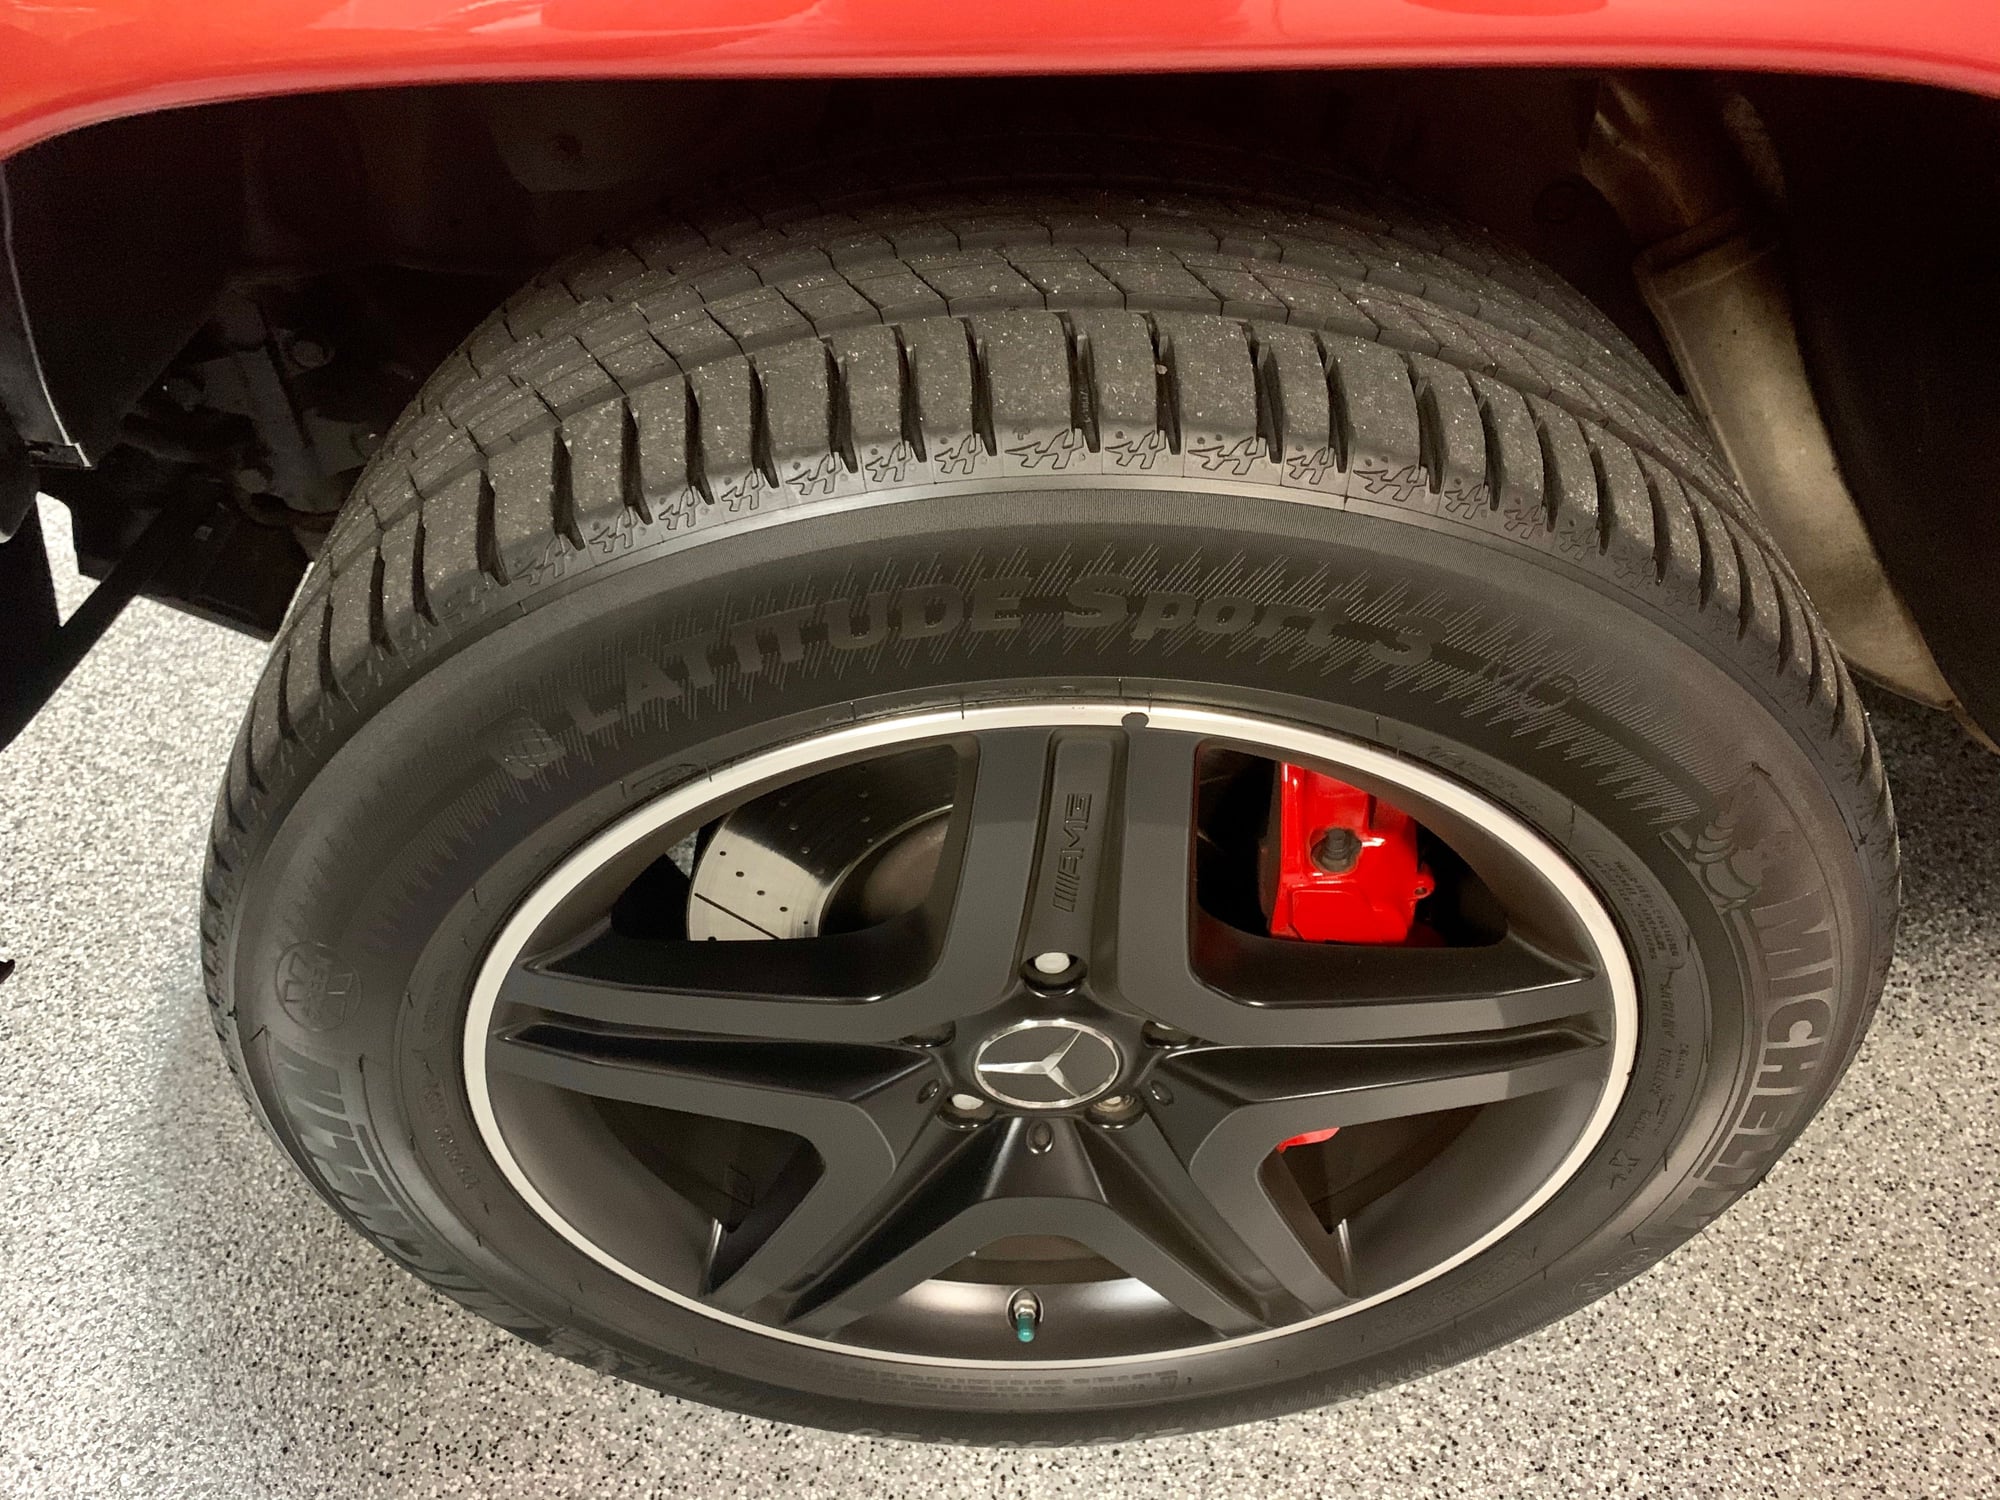 Wheels and Tires/Axles - 20” Factory OEM Wheels with Michelin Latitude tires with less than 200 miles. - Used - 2016 Mercedes-Benz G63 AMG - Anderson, SC 29621, United States